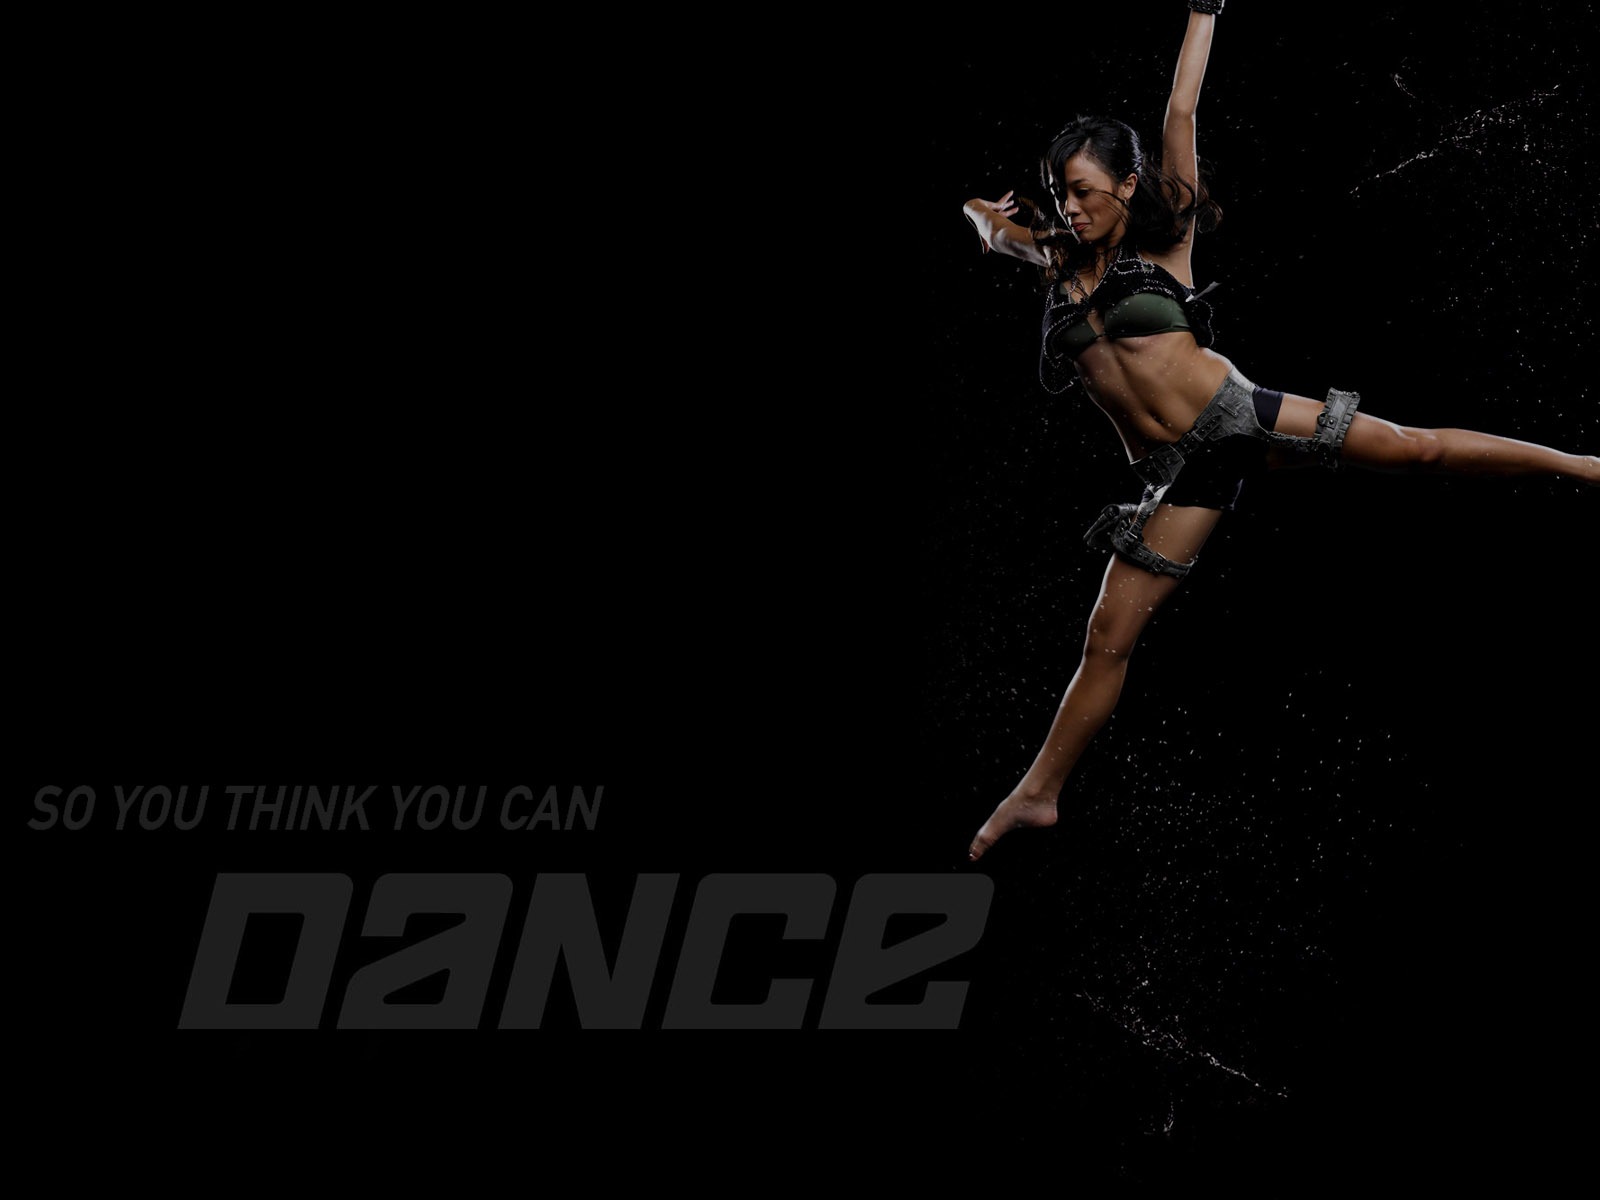 So You Think You Can Dance wallpaper (2) #3 - 1600x1200